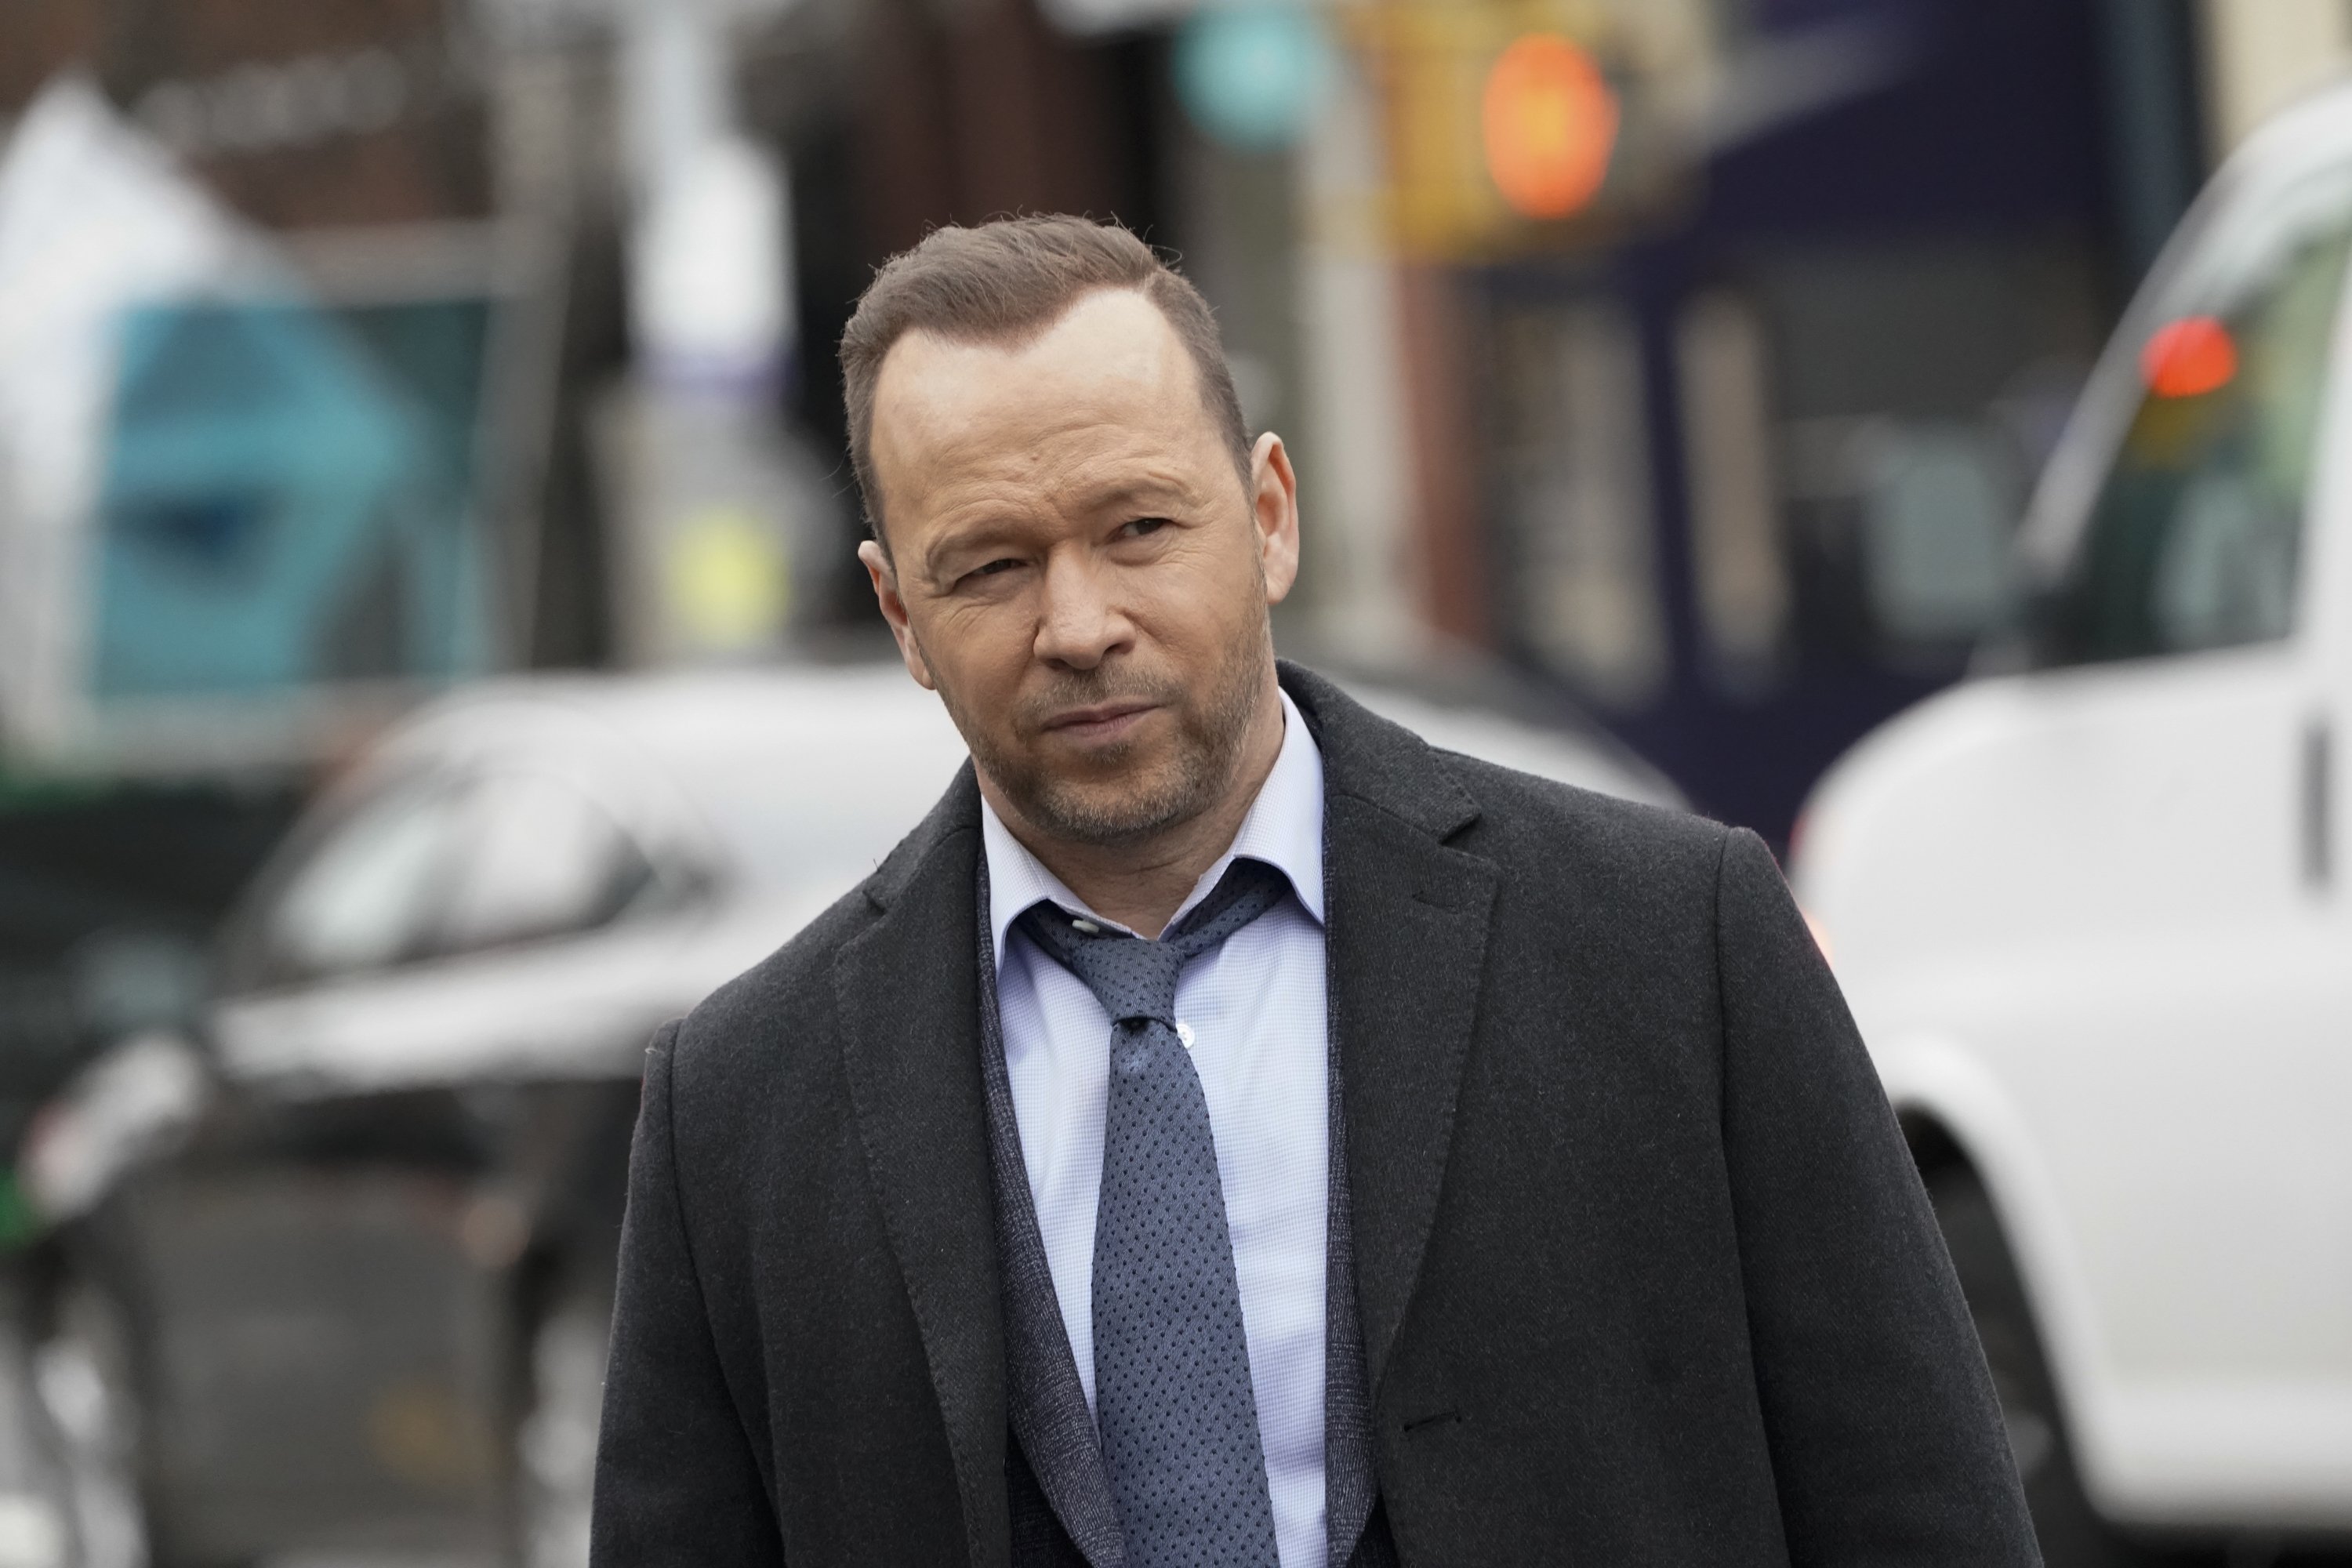 Donnie Wahlberg as Danny Reagan in "Blue Blood" on CBS. | Source: Getty Images.